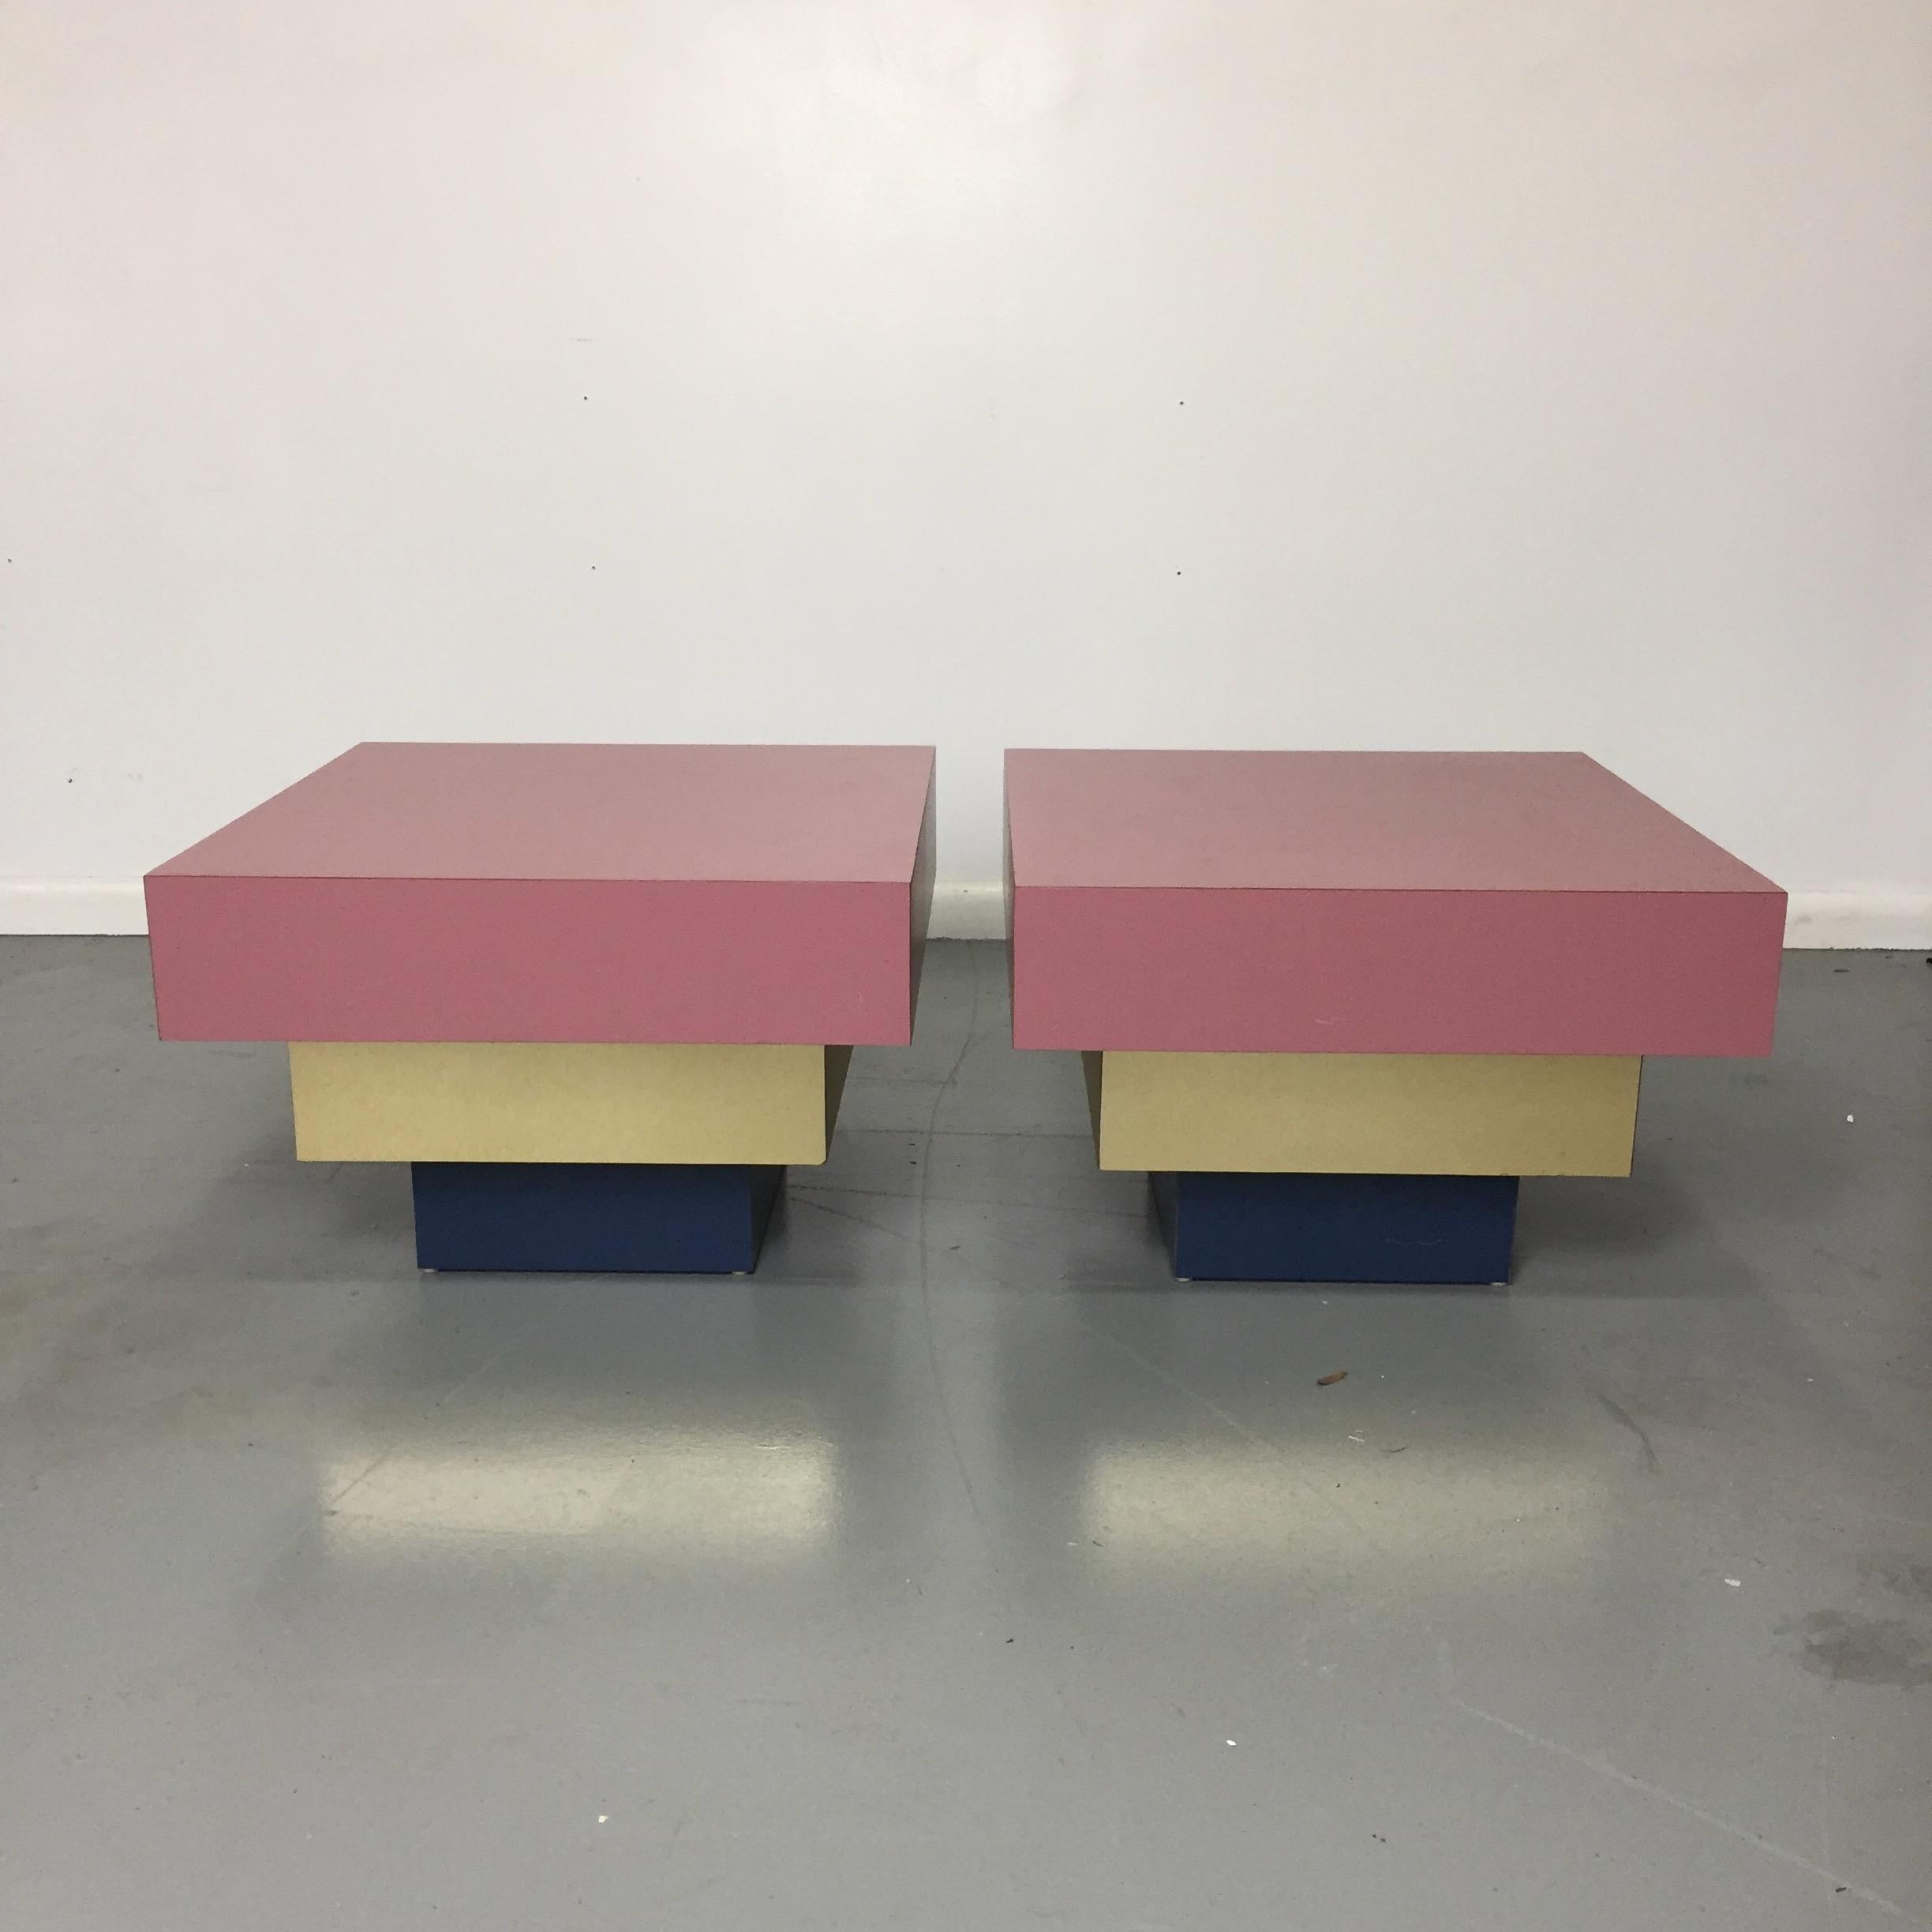 Formica Dusty Rose and Brass Stepped Side Tables Midcentury a La Karl Springer 5